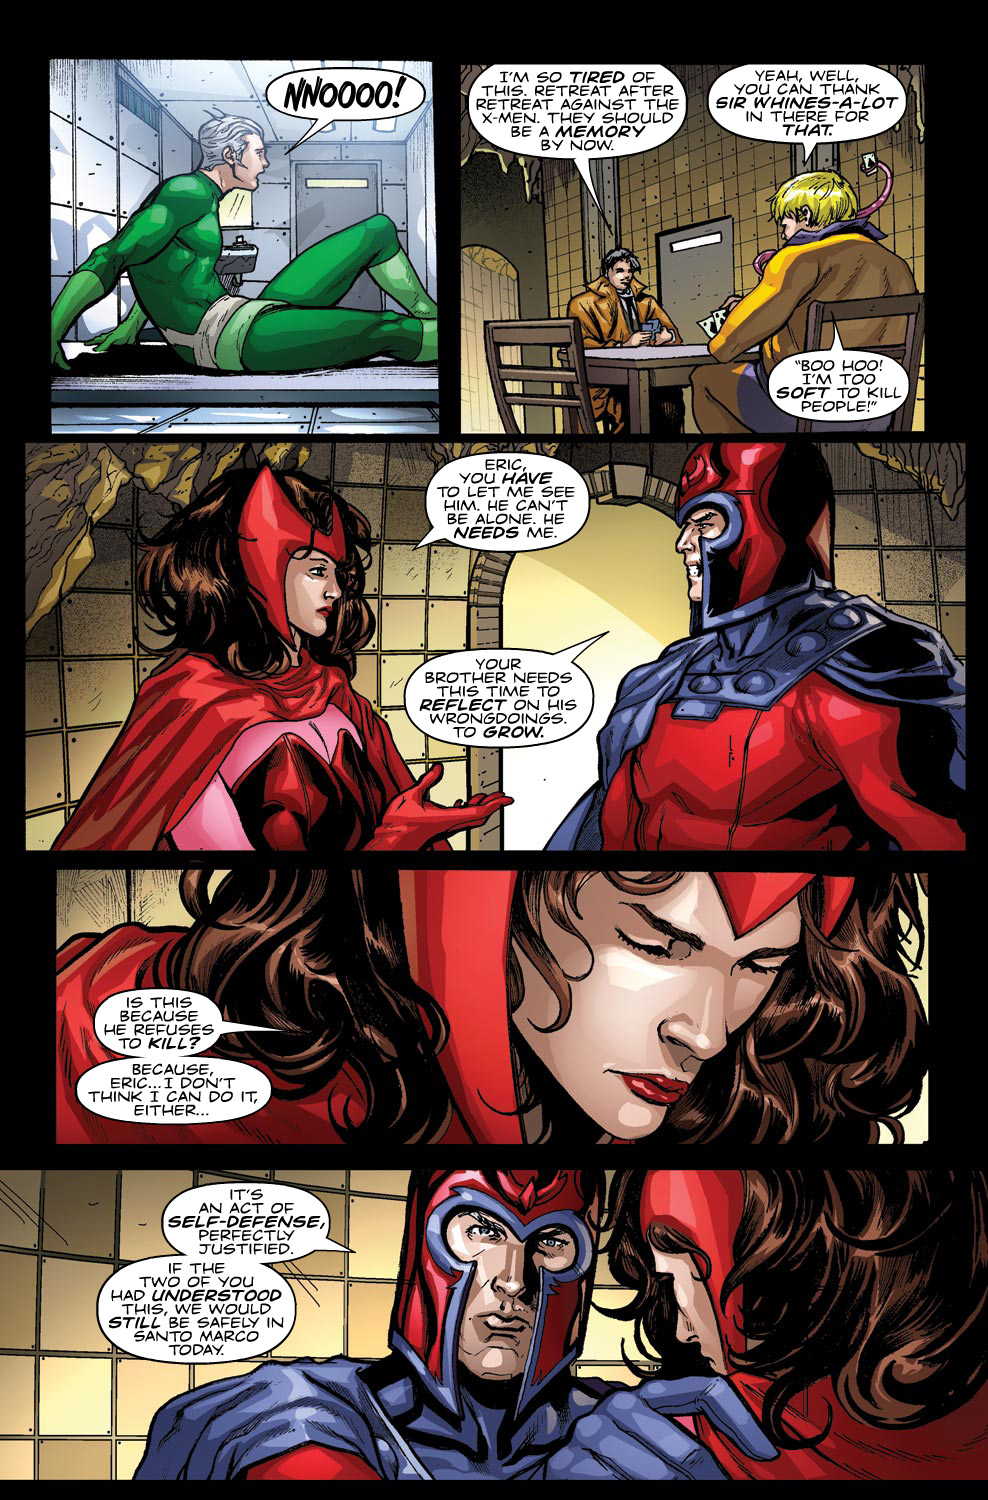 Avengers Origins The Scarlet Witch Quicksilver Full  Read Avengers Origins  The Scarlet Witch Quicksilver Full comic online in high quality. Read Full  Comic online for free - Read comics online in